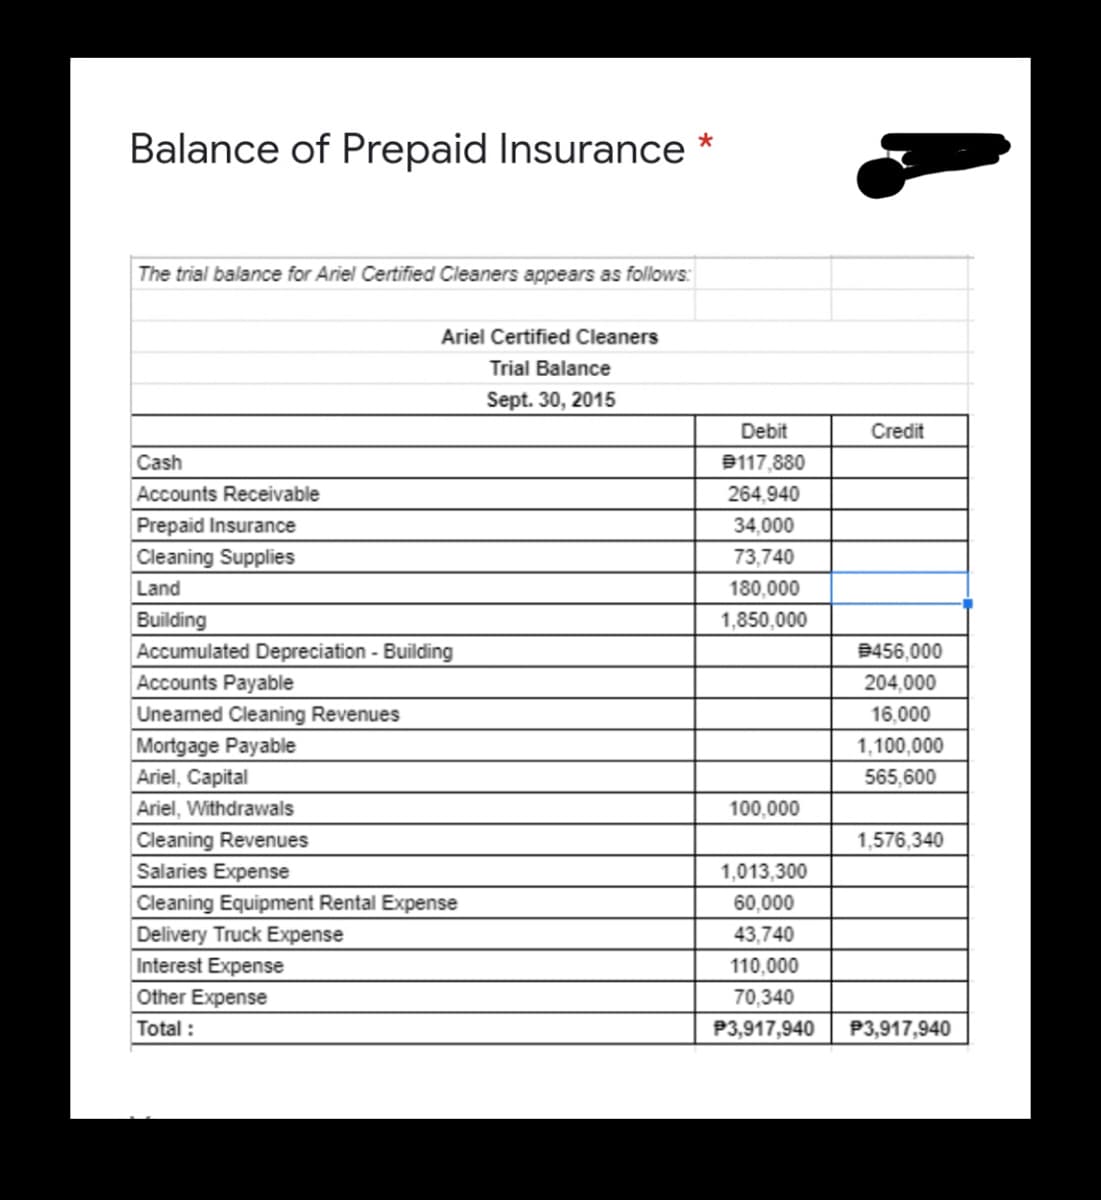 Balance of Prepaid Insurance
The trial balance for Ariel Certified Cleaners appears as follows:
Ariel Certified Cleaners
Trial Balance
Sept. 30, 2015
Debit
Credit
Cash
B117,880
Accounts Receivable
264,940
Prepaid Insurance
34,000
Cleaning Supplies
73,740
Land
180,000
Building
Accumulated Depreciation - Building
Accounts Payable
1,850,000
9456,000
204,000
Uneamed Cleaning Revenues
16,000
Mortgage Payable
Ariel, Capital
1,100,000
565,600
Ariel, Withdrawals
100,000
Cleaning Revenues
1,576,340
Salaries Expense
1,013,300
Cleaning Equipment Rental Expense
60,000
Delivery Truck Expense
43,740
Interest Expense
110,000
Other Expense
70,340
Total :
P3,917,940
P3,917,940
